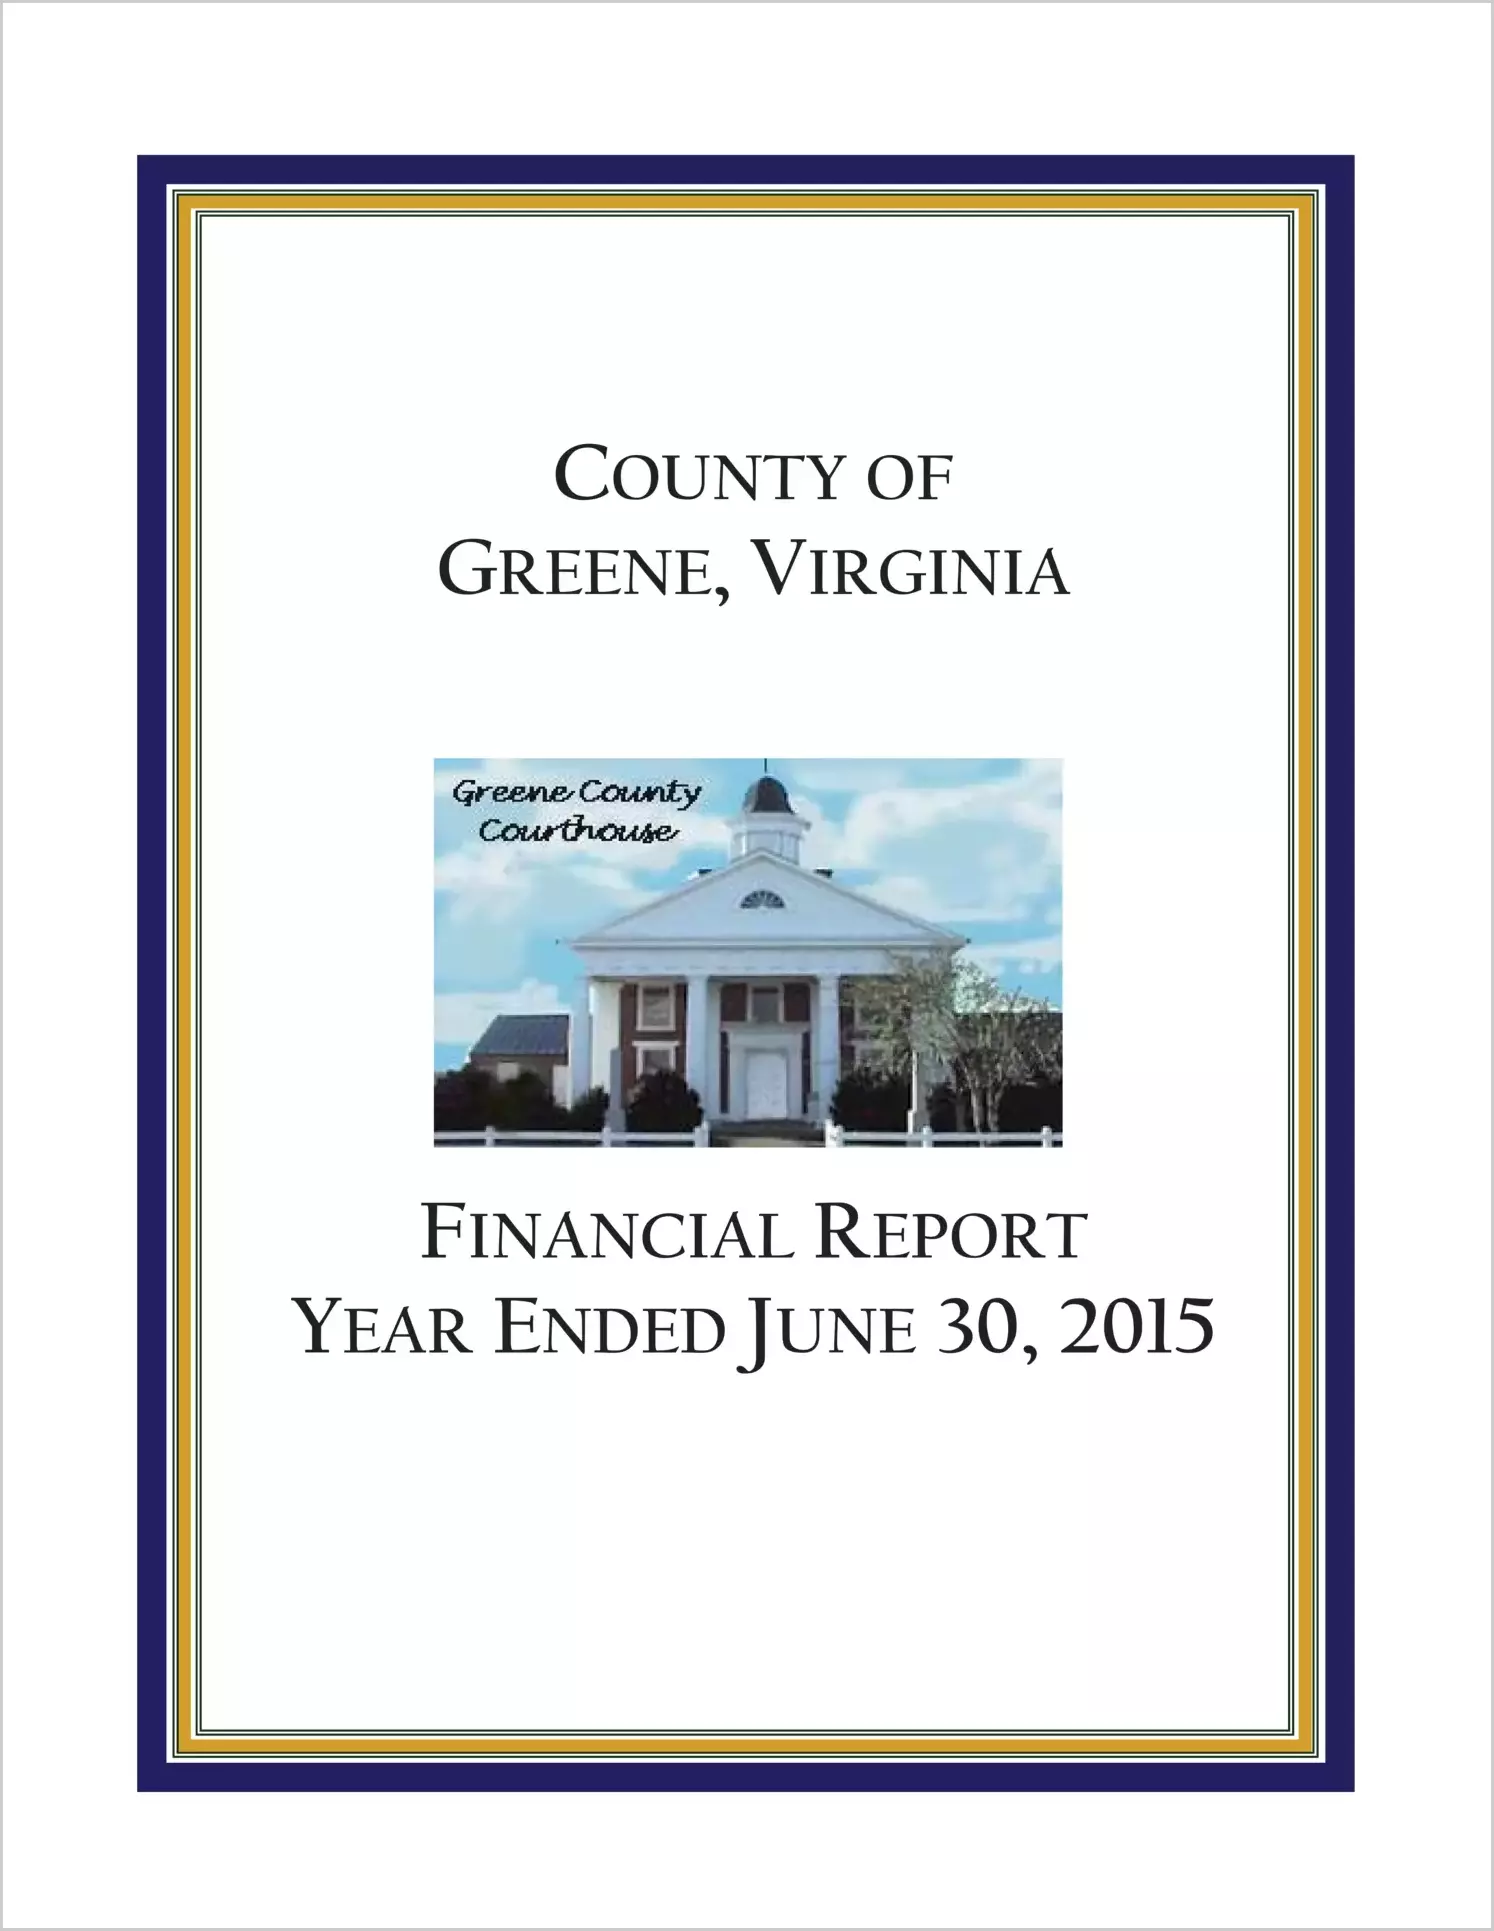 2015 Annual Financial Report for County of Greene